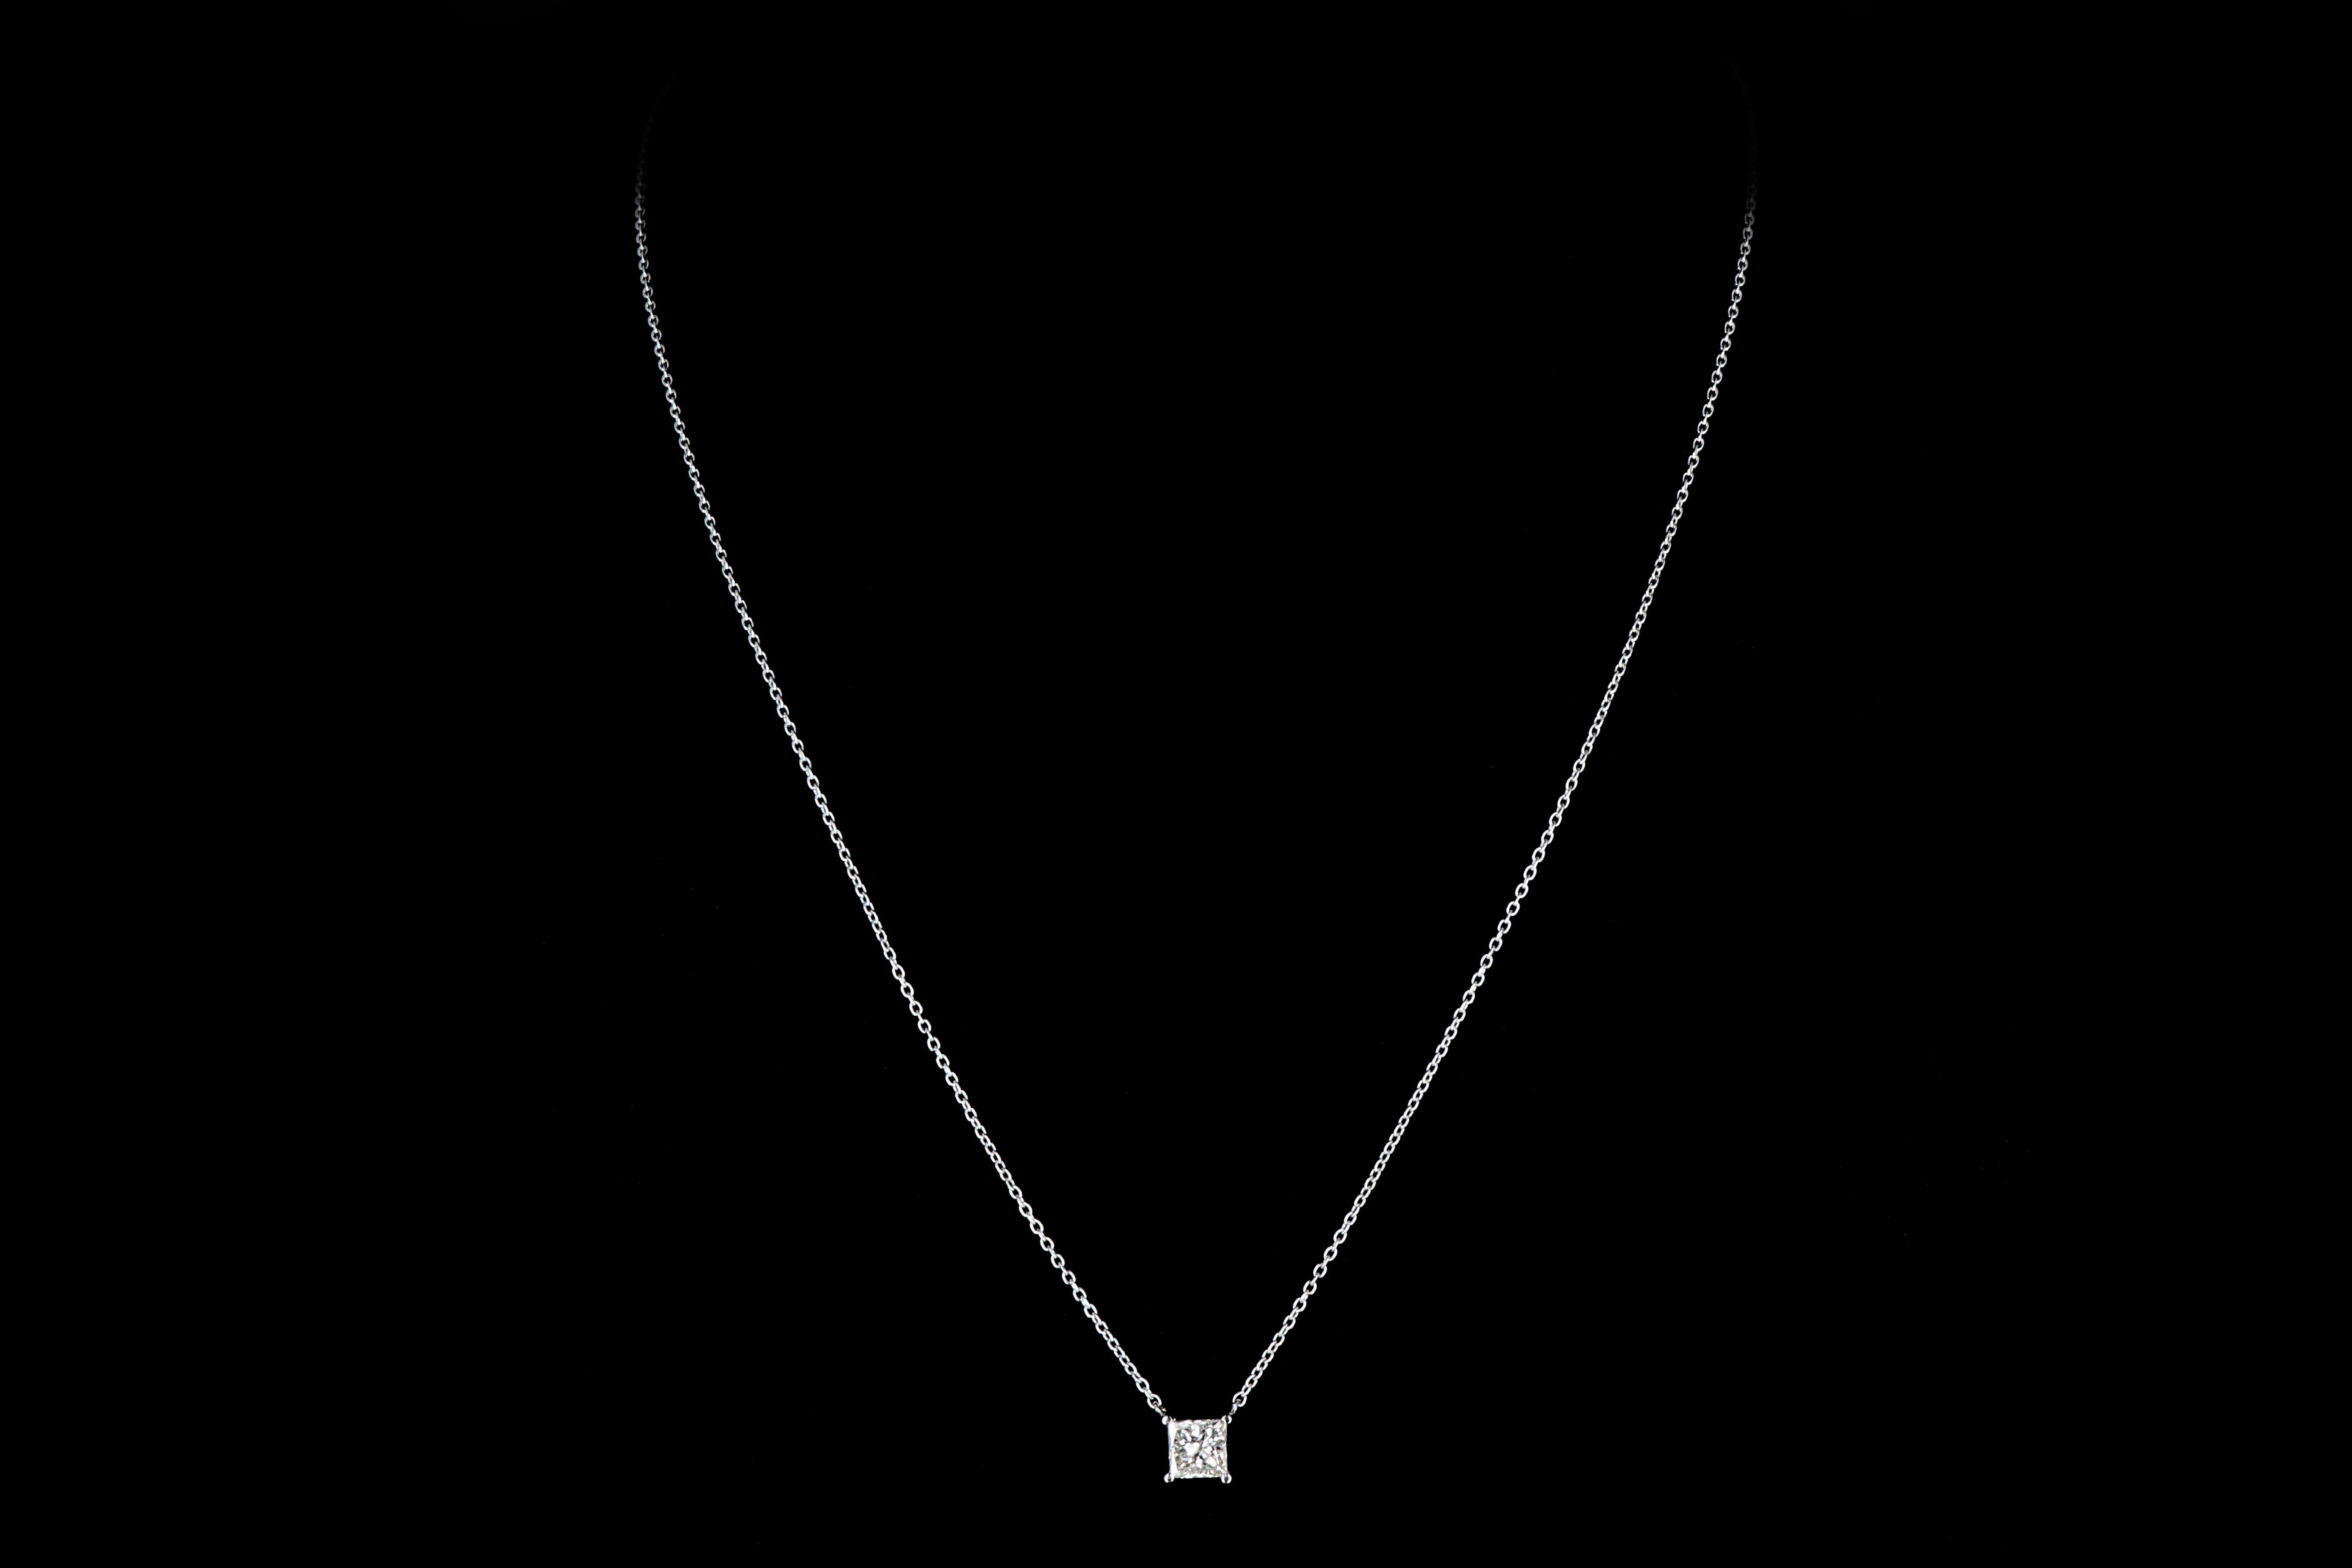 Era: New

Composition: 14K White Gold

Primary Stone: Princess Cut Diamond

Carat Weight: .98 Carat

Color: H

Clarity: I1 

Necklace Weight: 1.65 DWT 

Necklace Length: 18'' can be adjusted to 16''